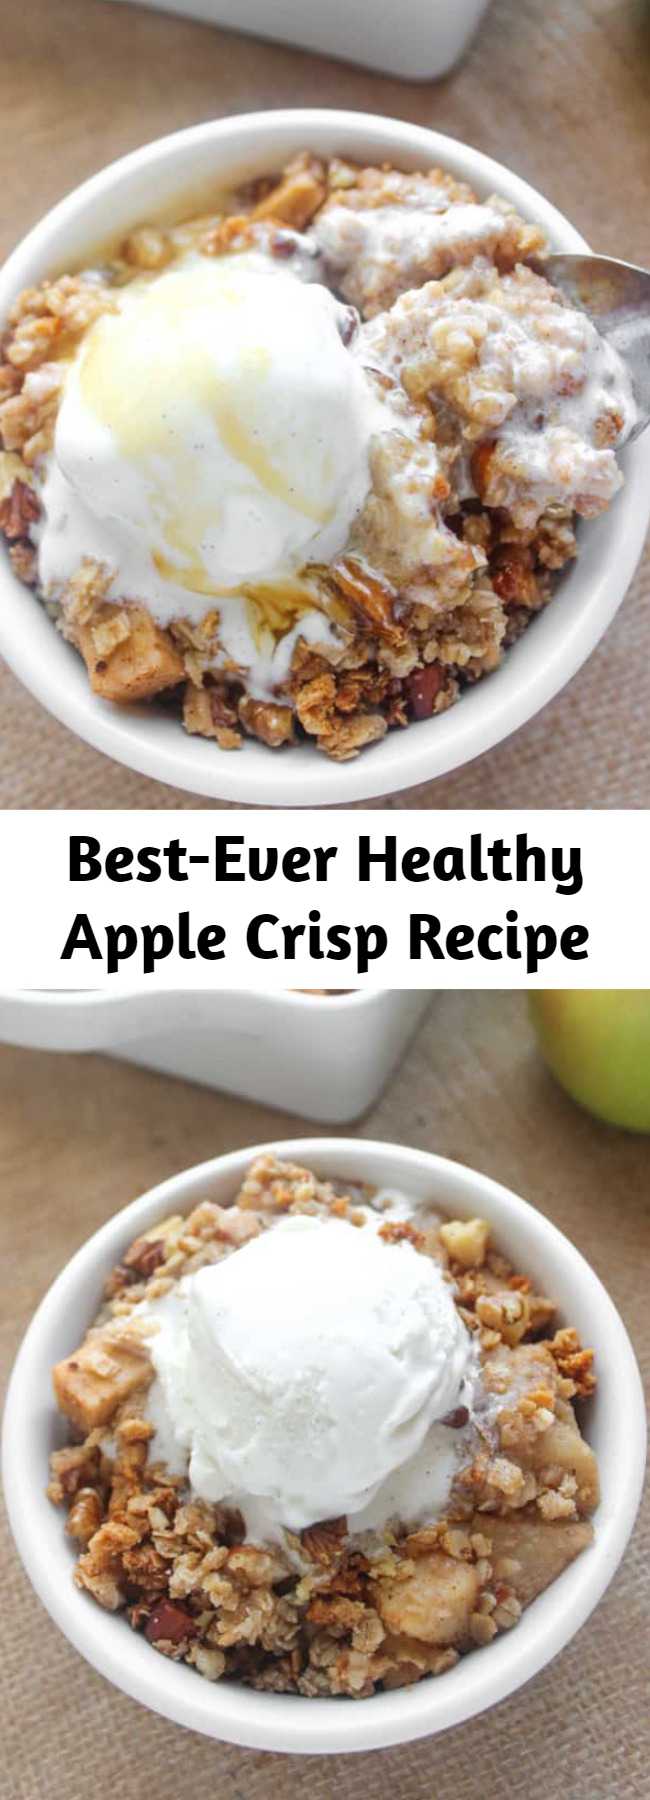 Best-Ever Healthy Apple Crisp Recipe - This healthy apple crisp is loaded with cinnamon apples and sweet crumbly topping. It’s free of refined sugar (and has just a touch of maple syrup, although you can sub honey), but you’d never know it. Serve with vanilla ice cream for pure bliss! 